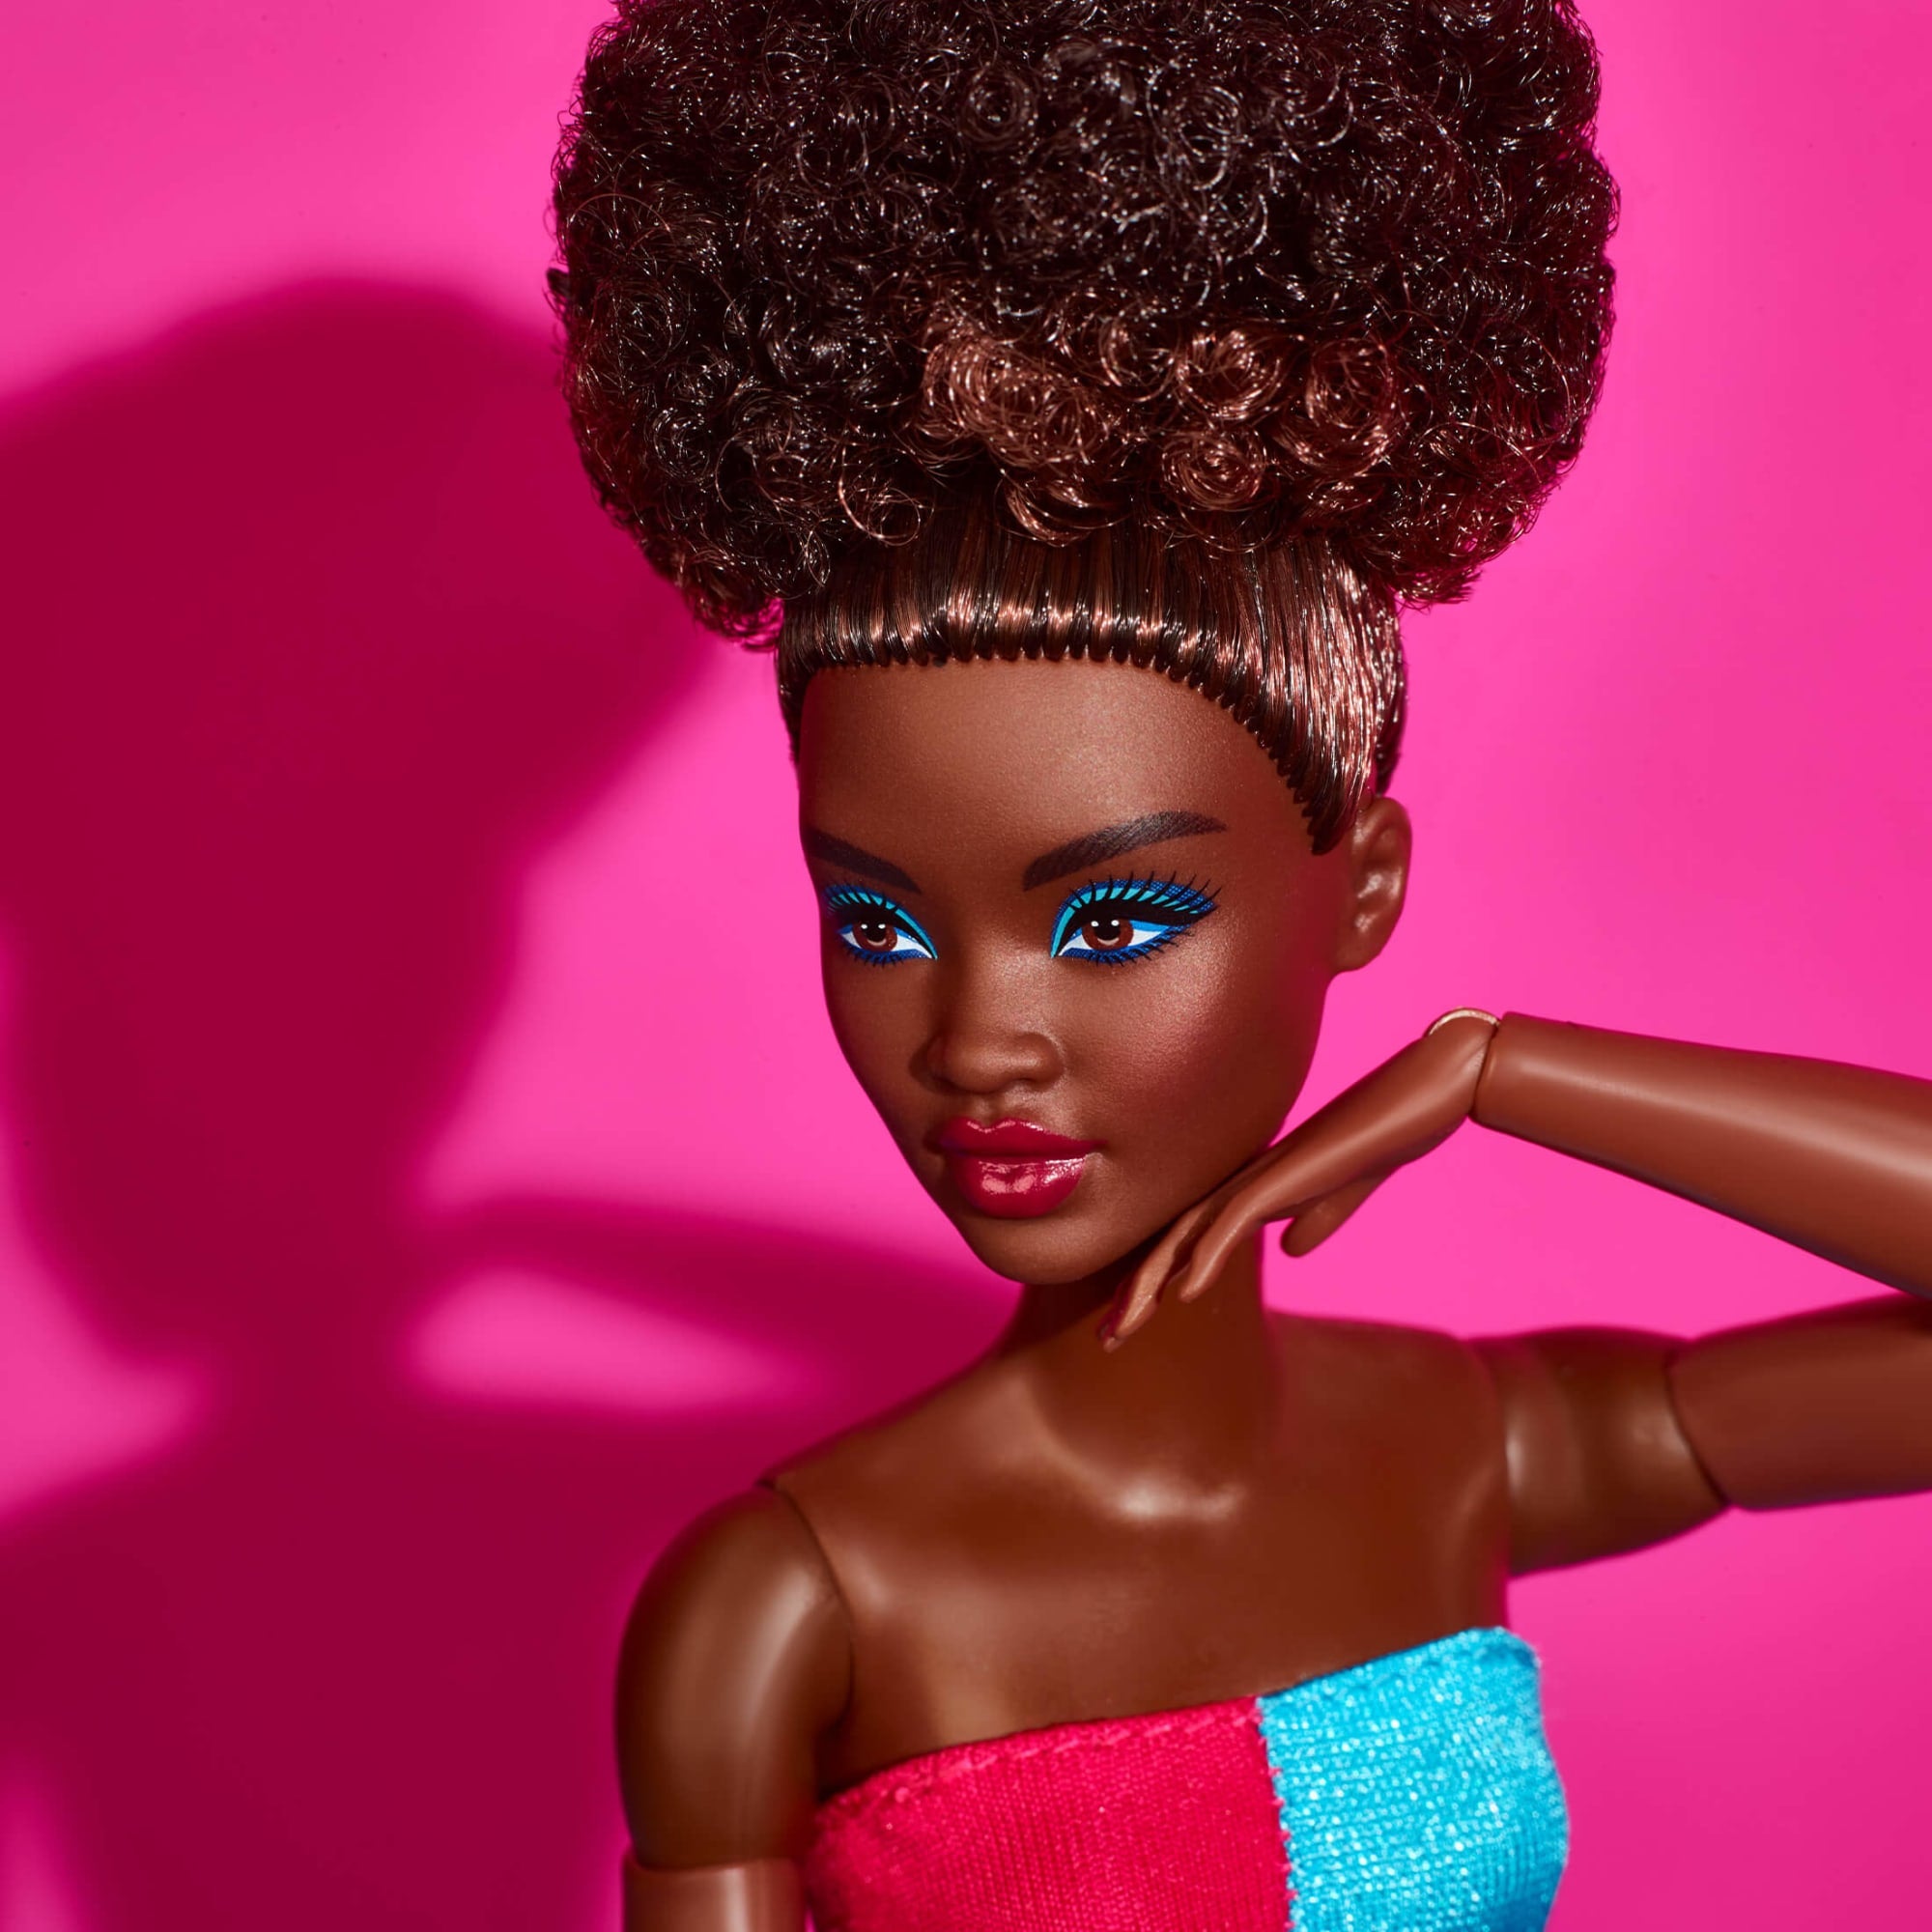 Barbie Looks Series 1. - 3. Wave - poseable Dolls + new faces